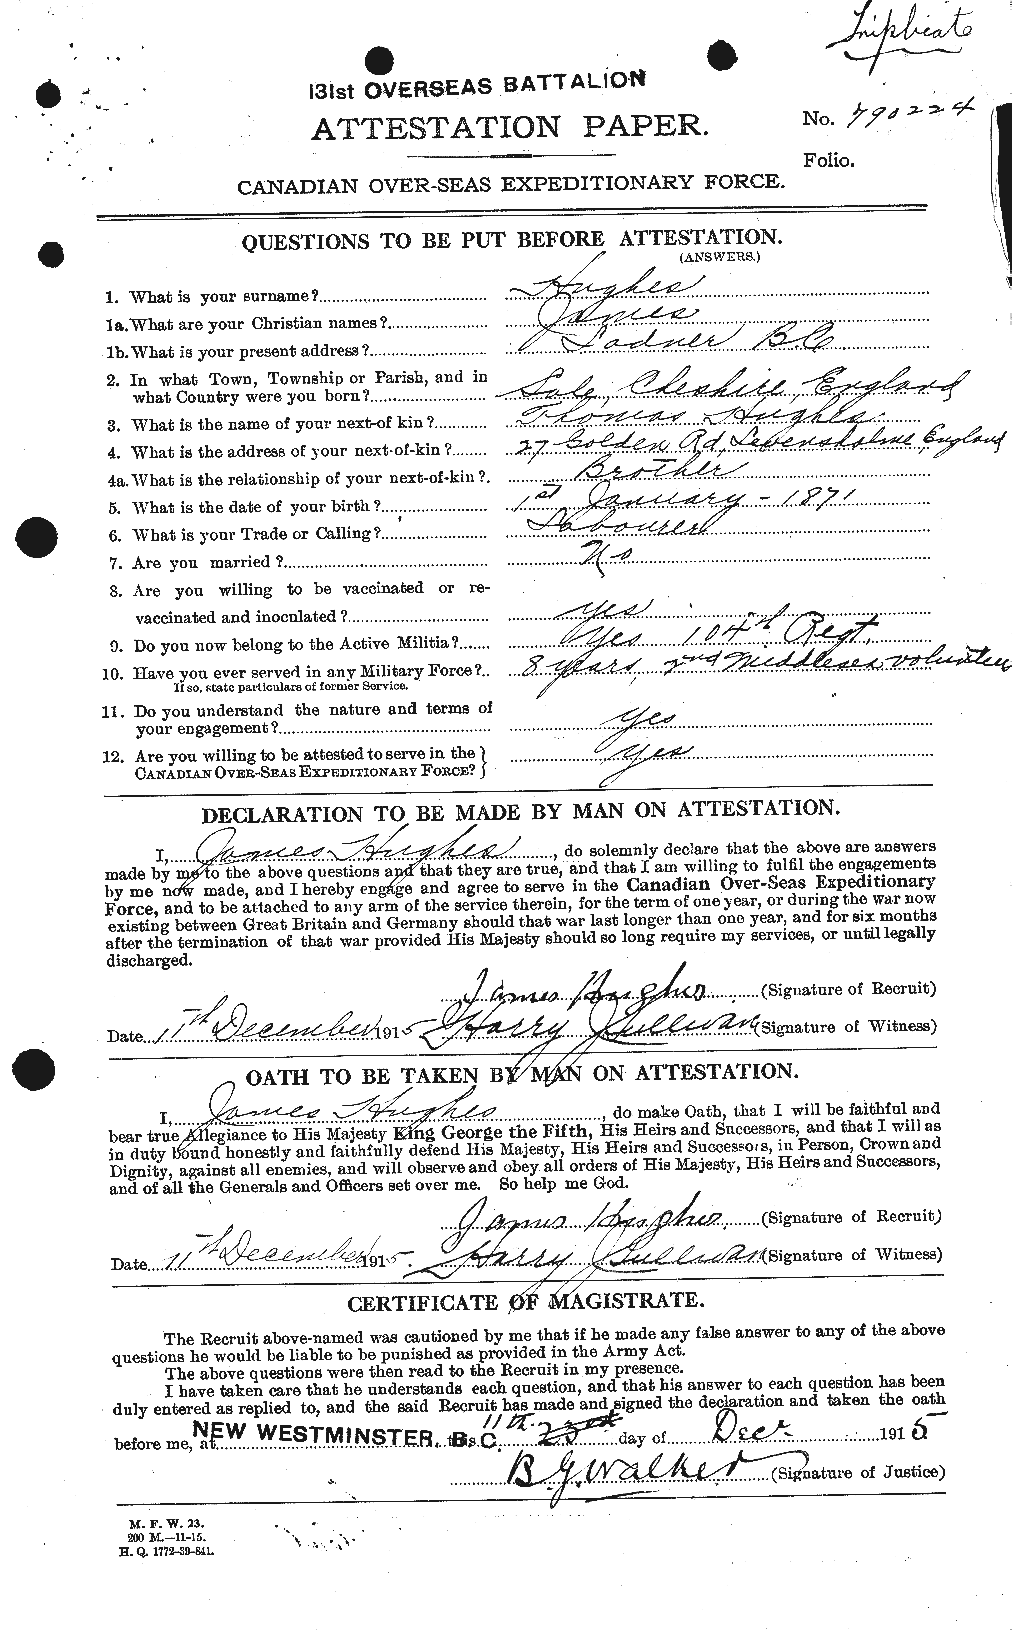 Personnel Records of the First World War - CEF 403954a